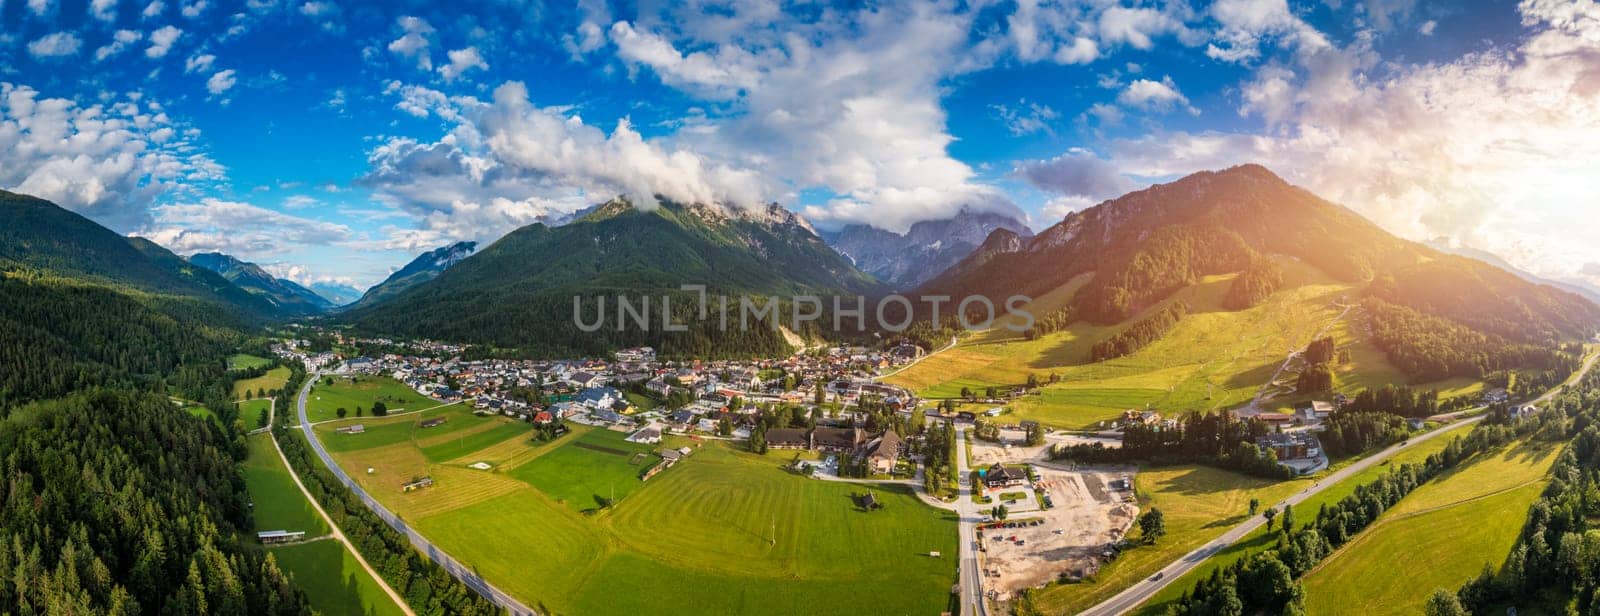 Kranjska Gora town in Slovenia at summer with beautiful nature and mountains in the background. View of mountain landscape next to Kranjska Gora in Slovenia, view from the top the town Kranjska Gora. by DaLiu